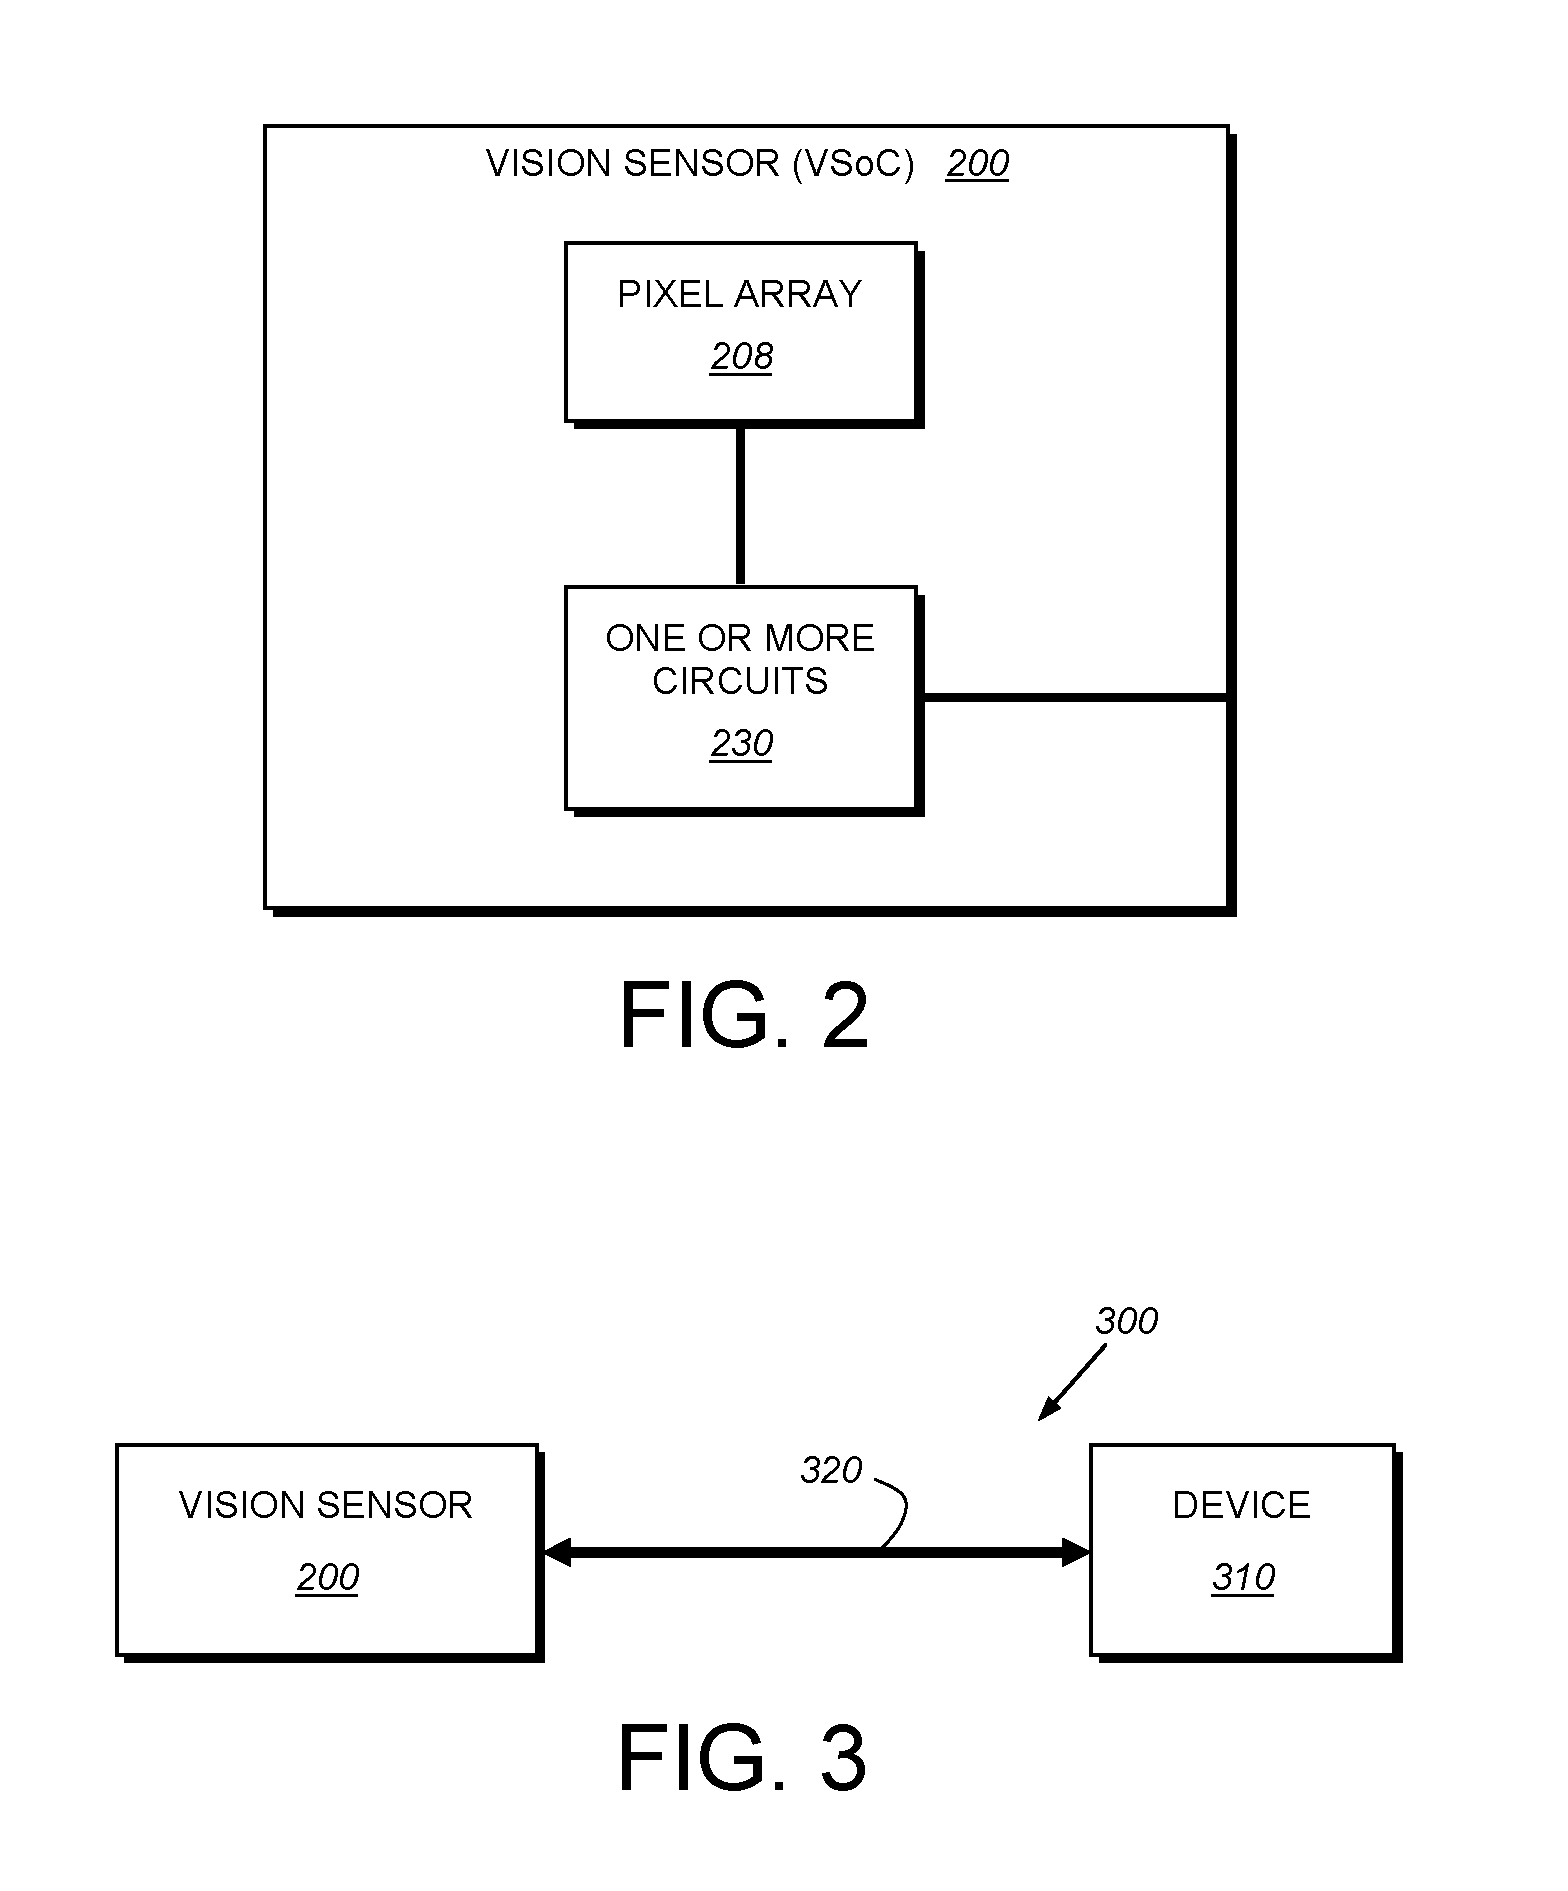 System and method for processing image data relative to a focus of attention within the overall image